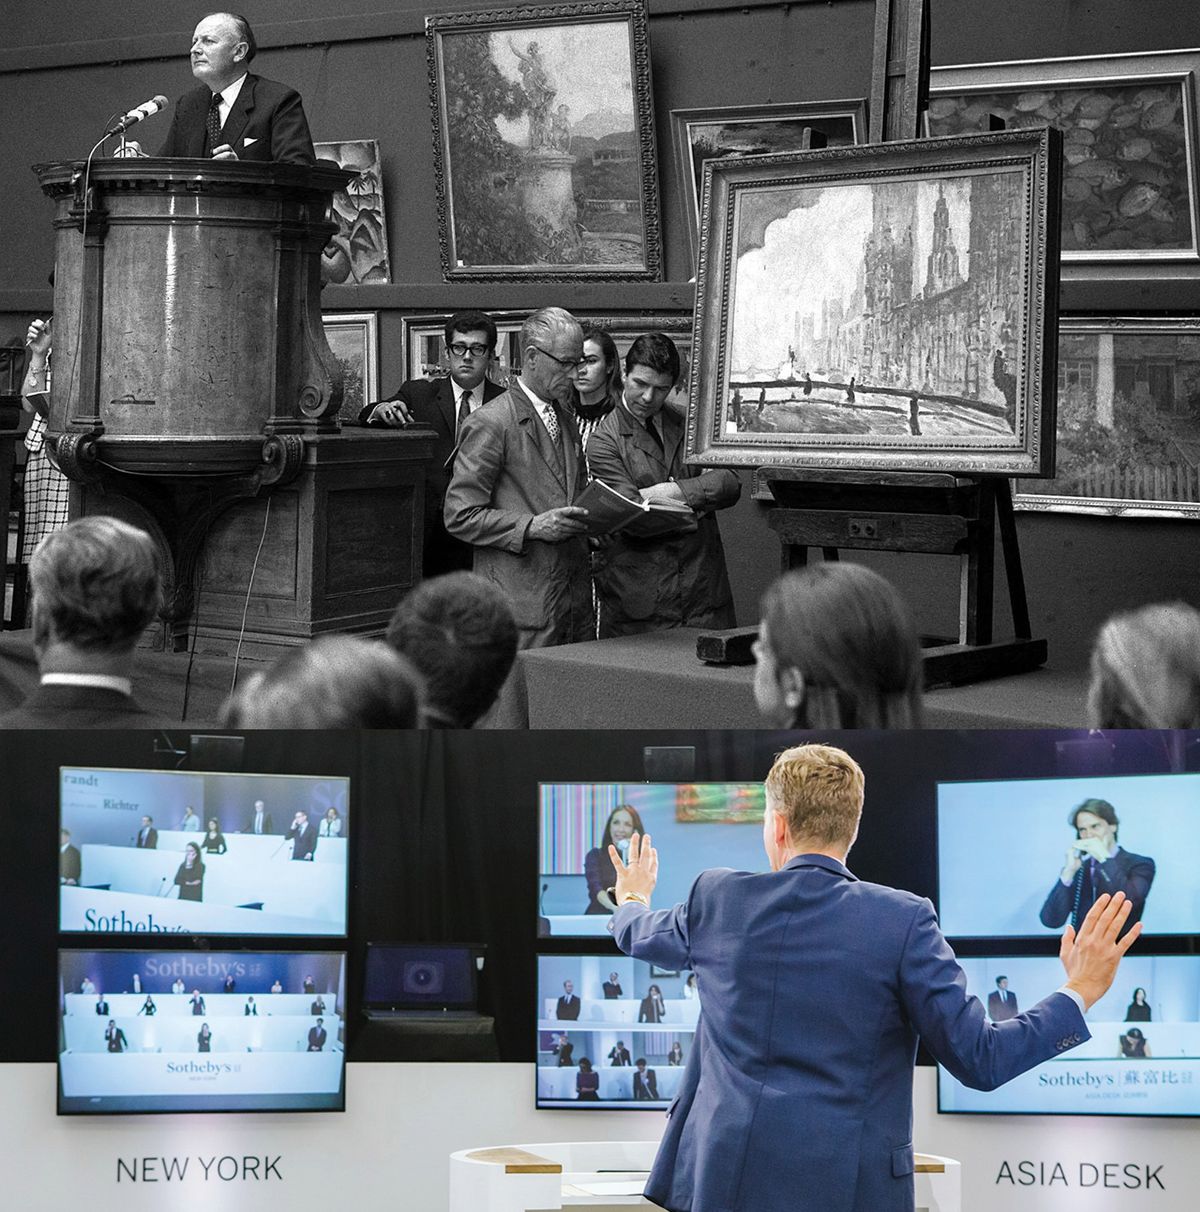 Sotheby’s then and now: Peter Wilson on the rostrum in 1968, and the livestreamed  Rembrandt to Richter auction in July. Top: PA Images/Alamy Stock Photo. Bottom: Courtesy of Sotheby’s.